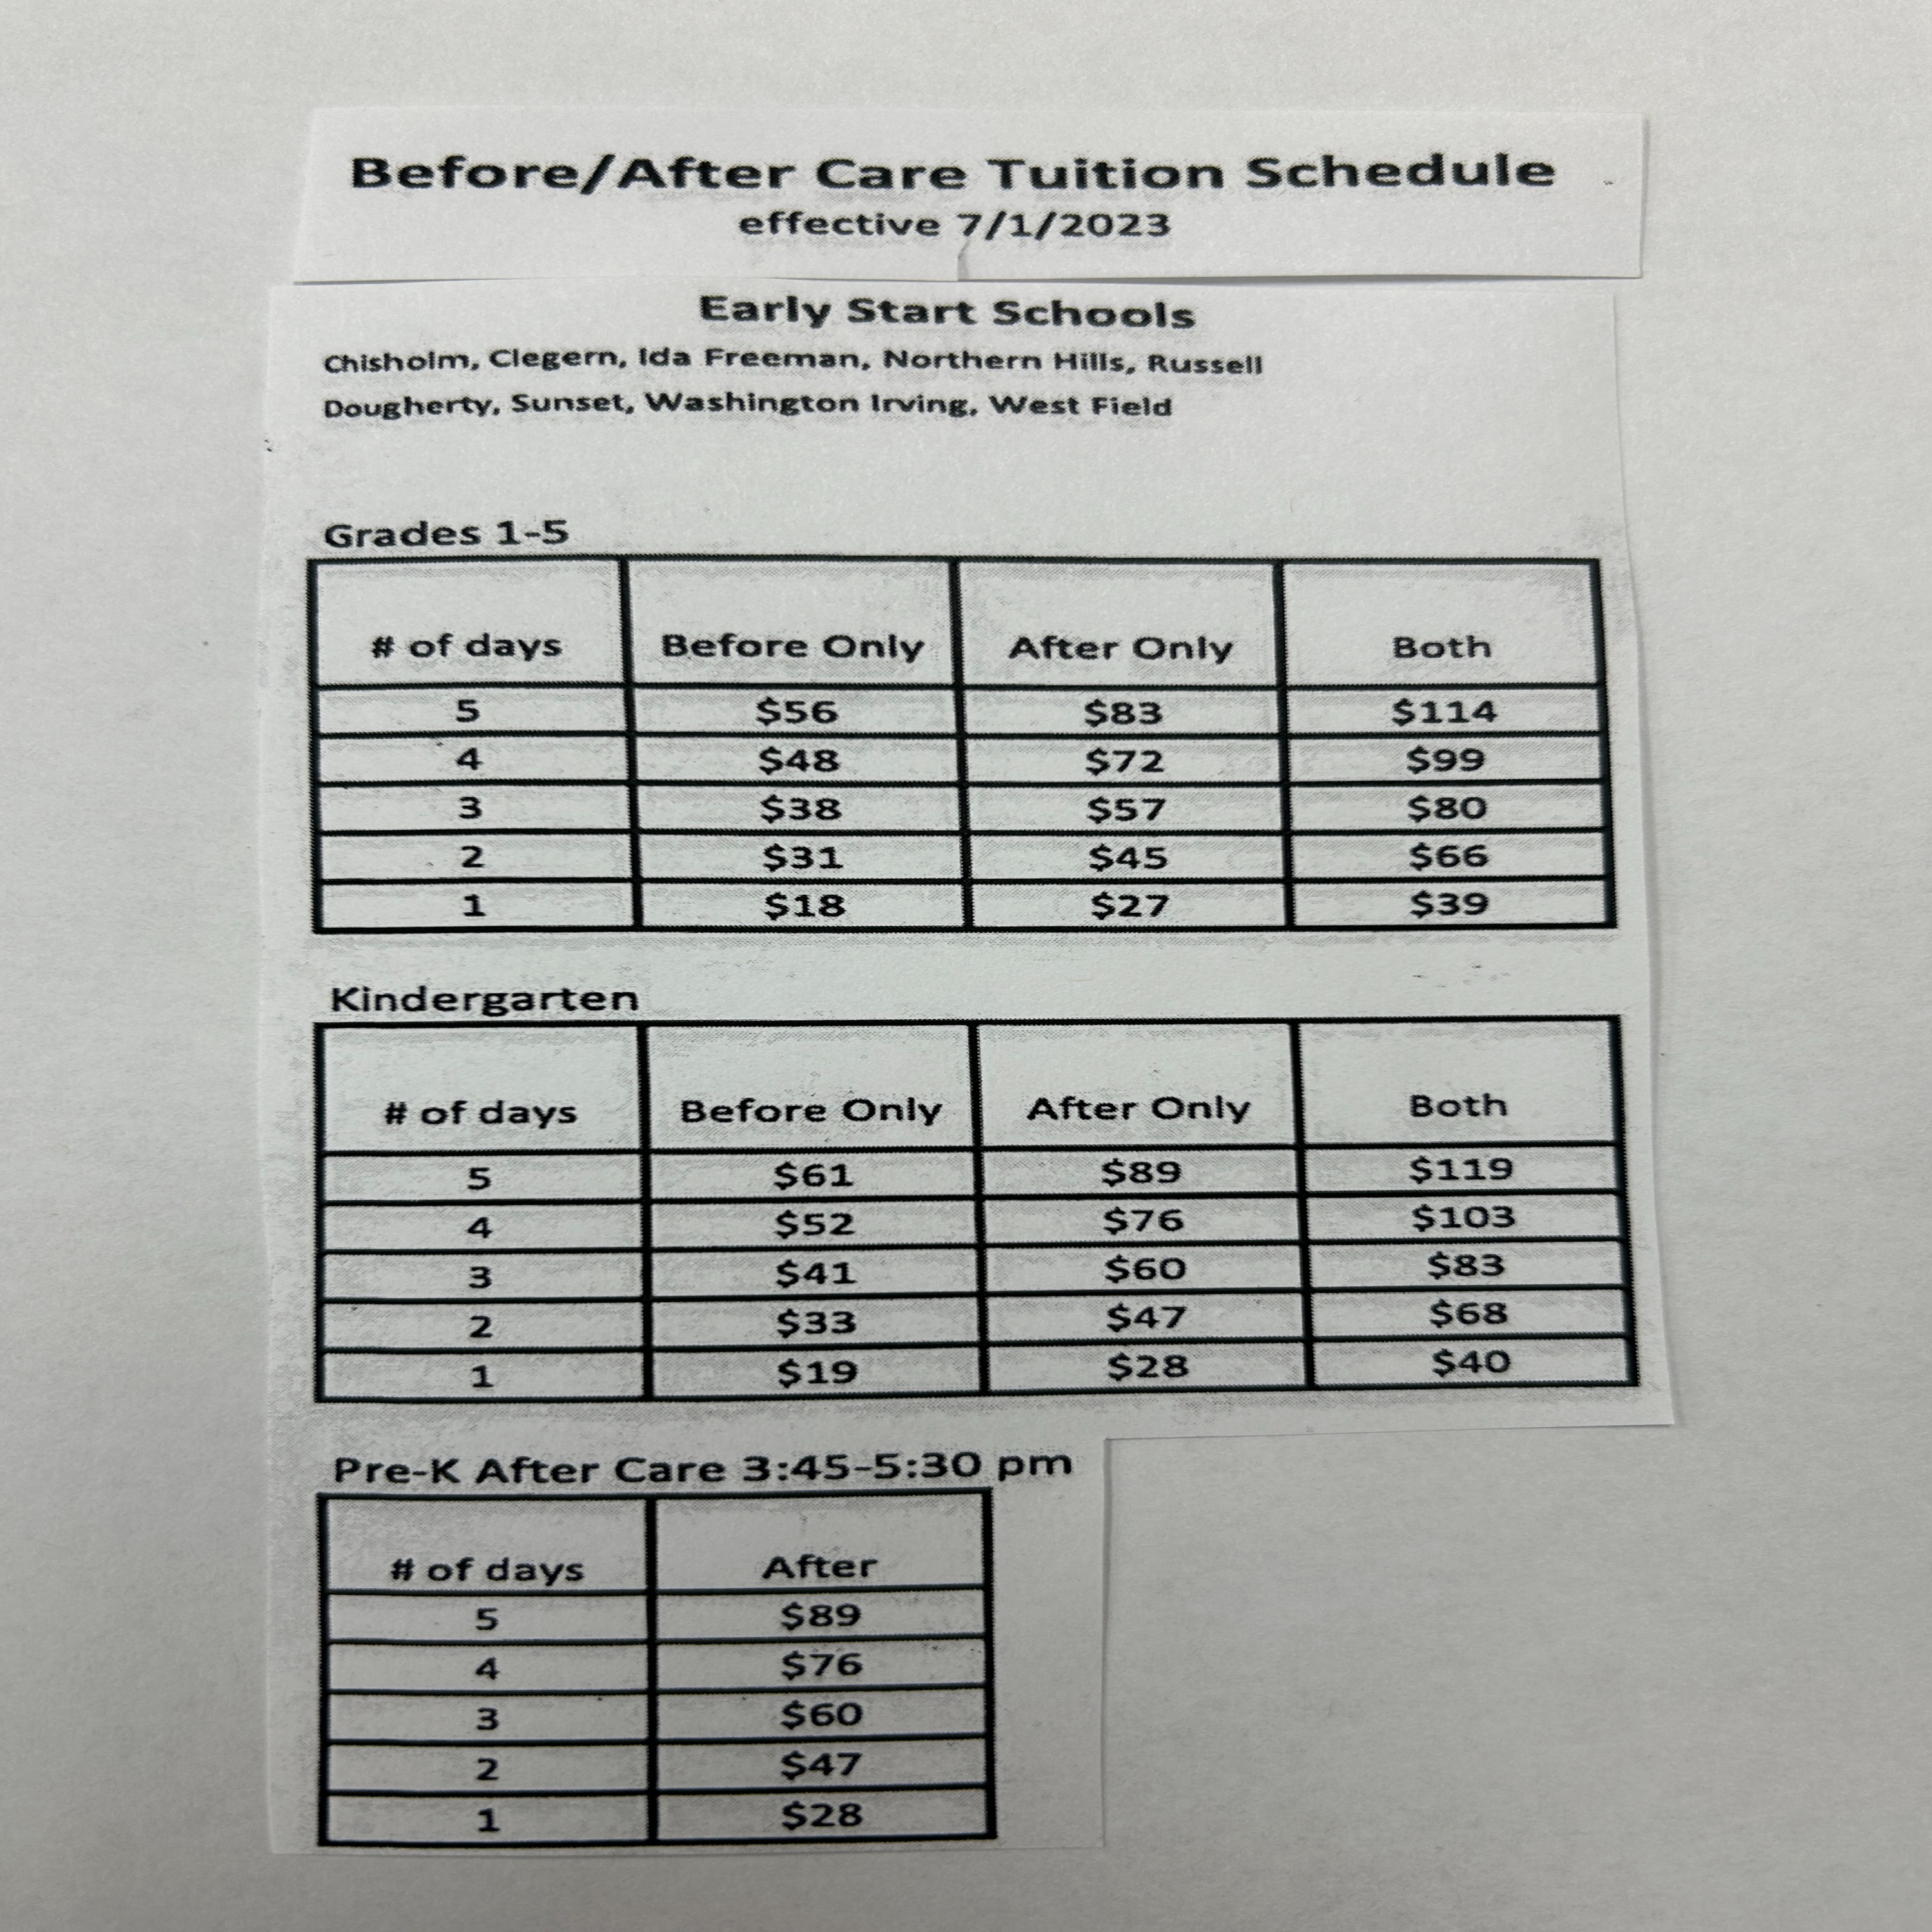 Early Start Before/After Care Tuition Schedule